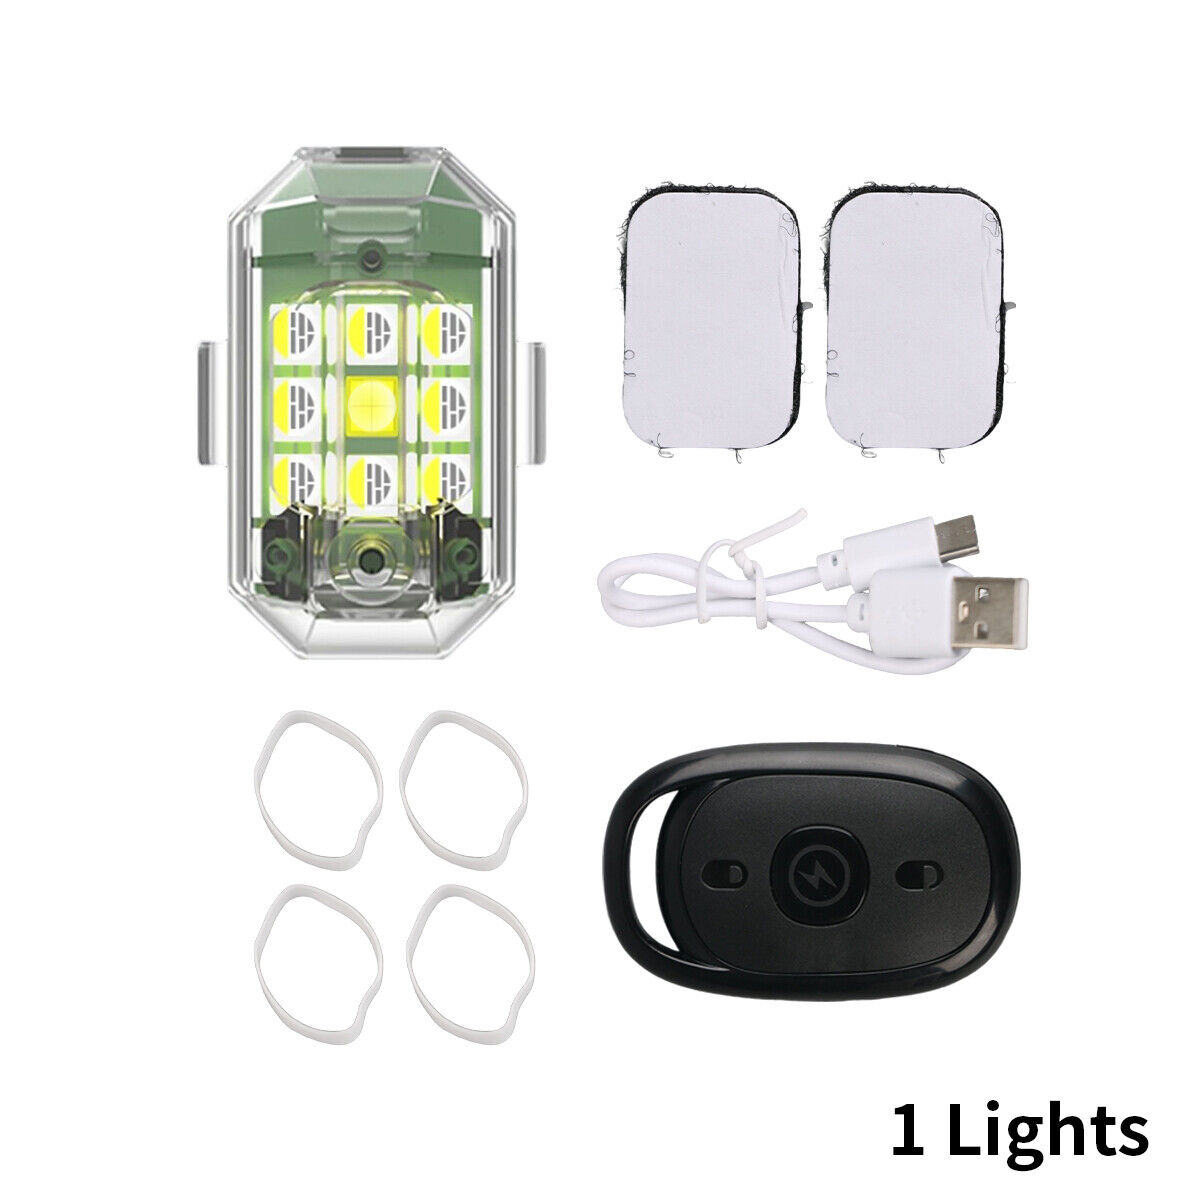 LED Strobe Light for Drones and Vehicles